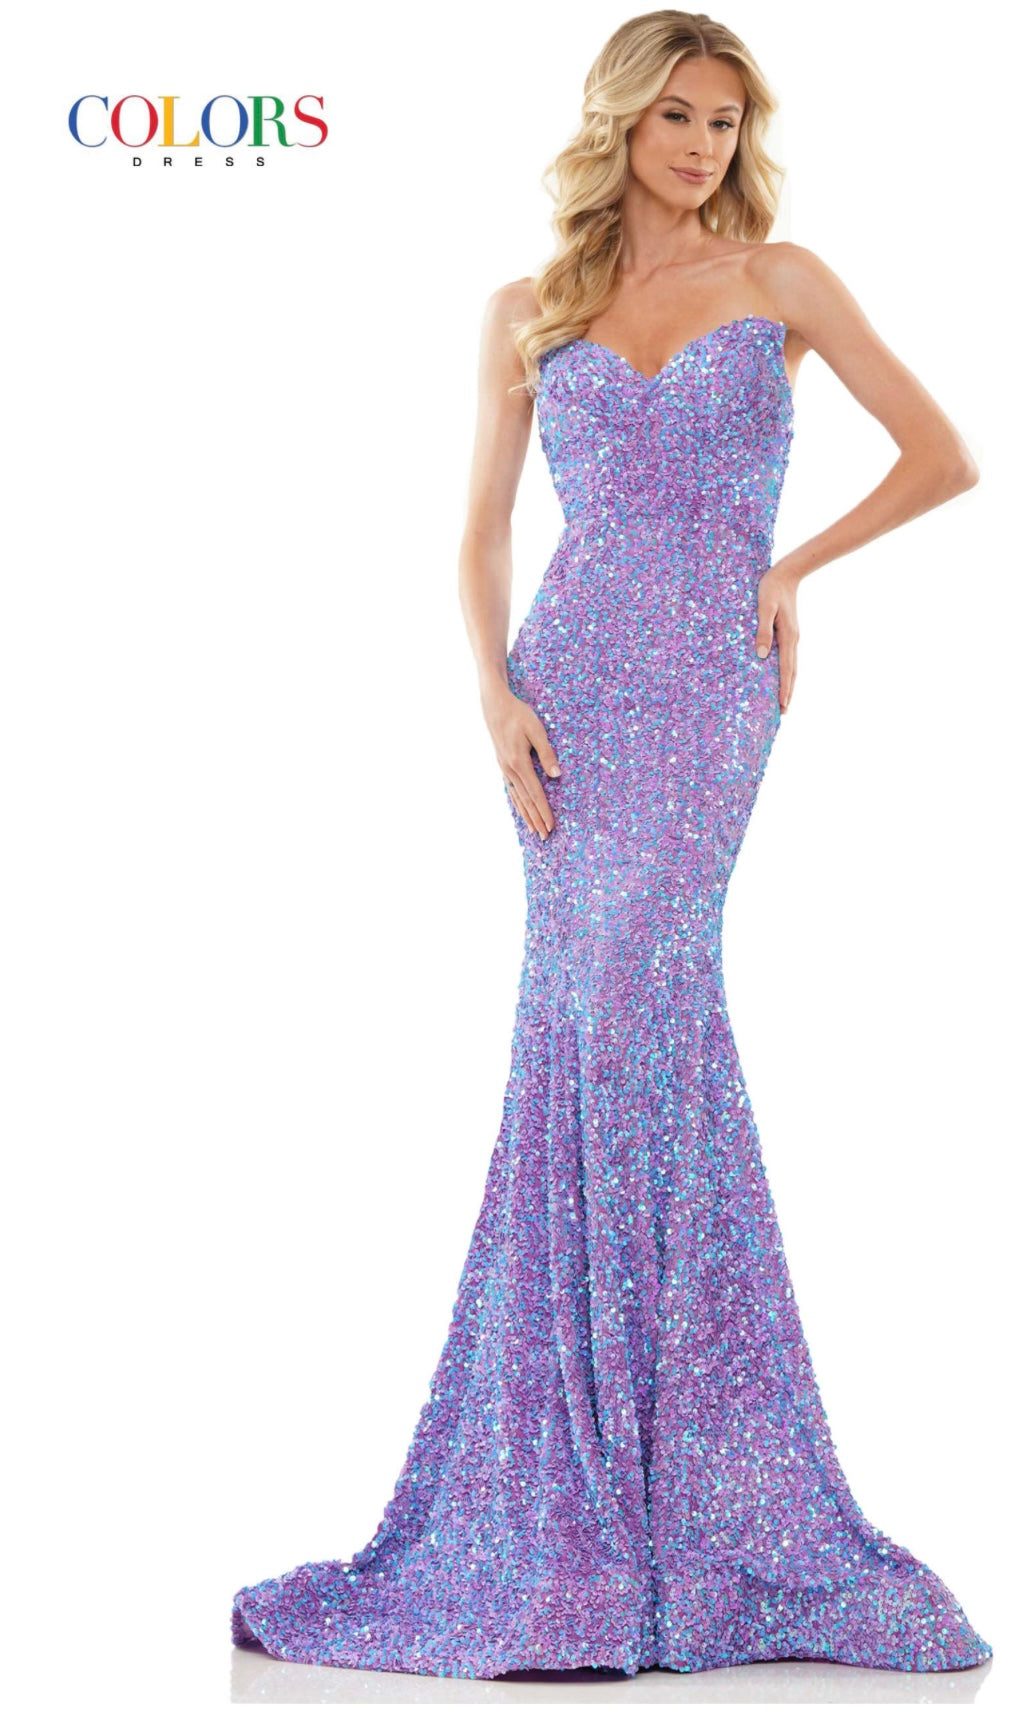 Velvet Sequin Fit and Flare Gown